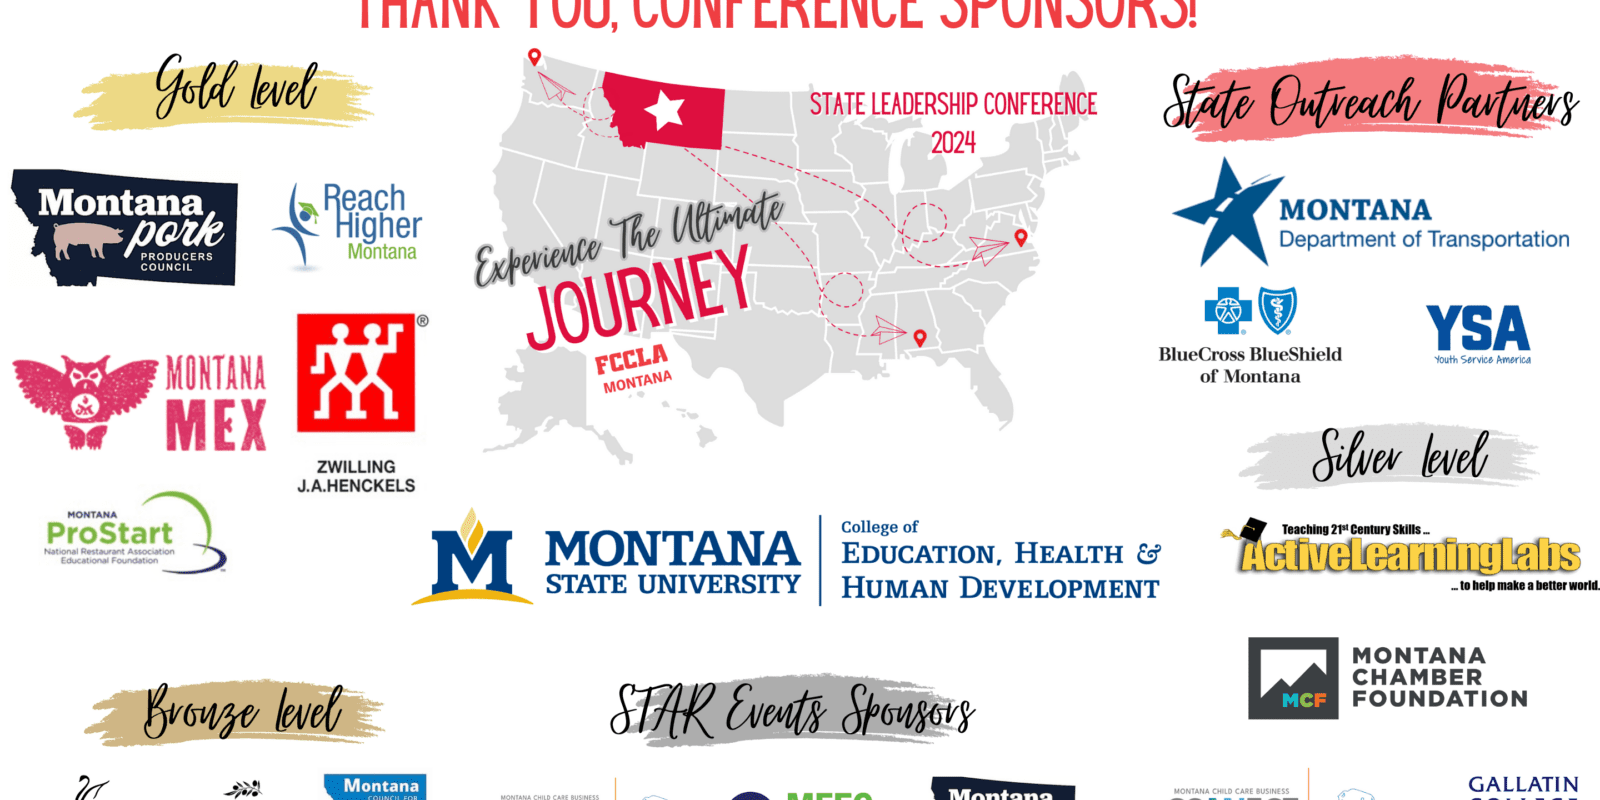 Special Thanks To Our 2024 State Leadership Conference Sponsors